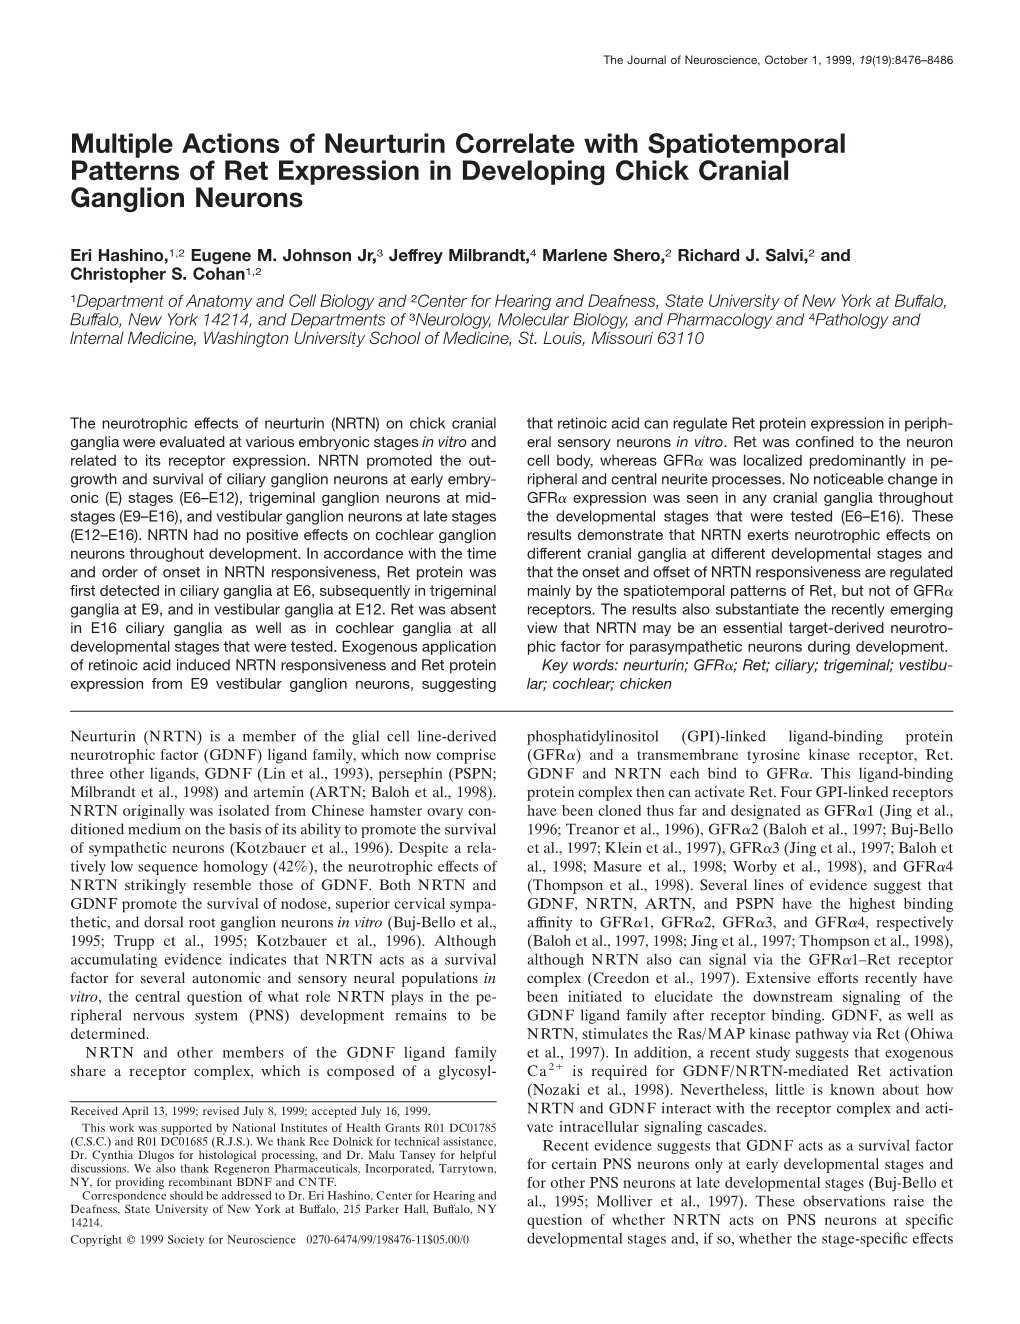 Multiple Actions of Neurturin Correlate with Spatiotemporal Patterns of Ret Expression in Developing Chick Cranial Ganglion Neurons